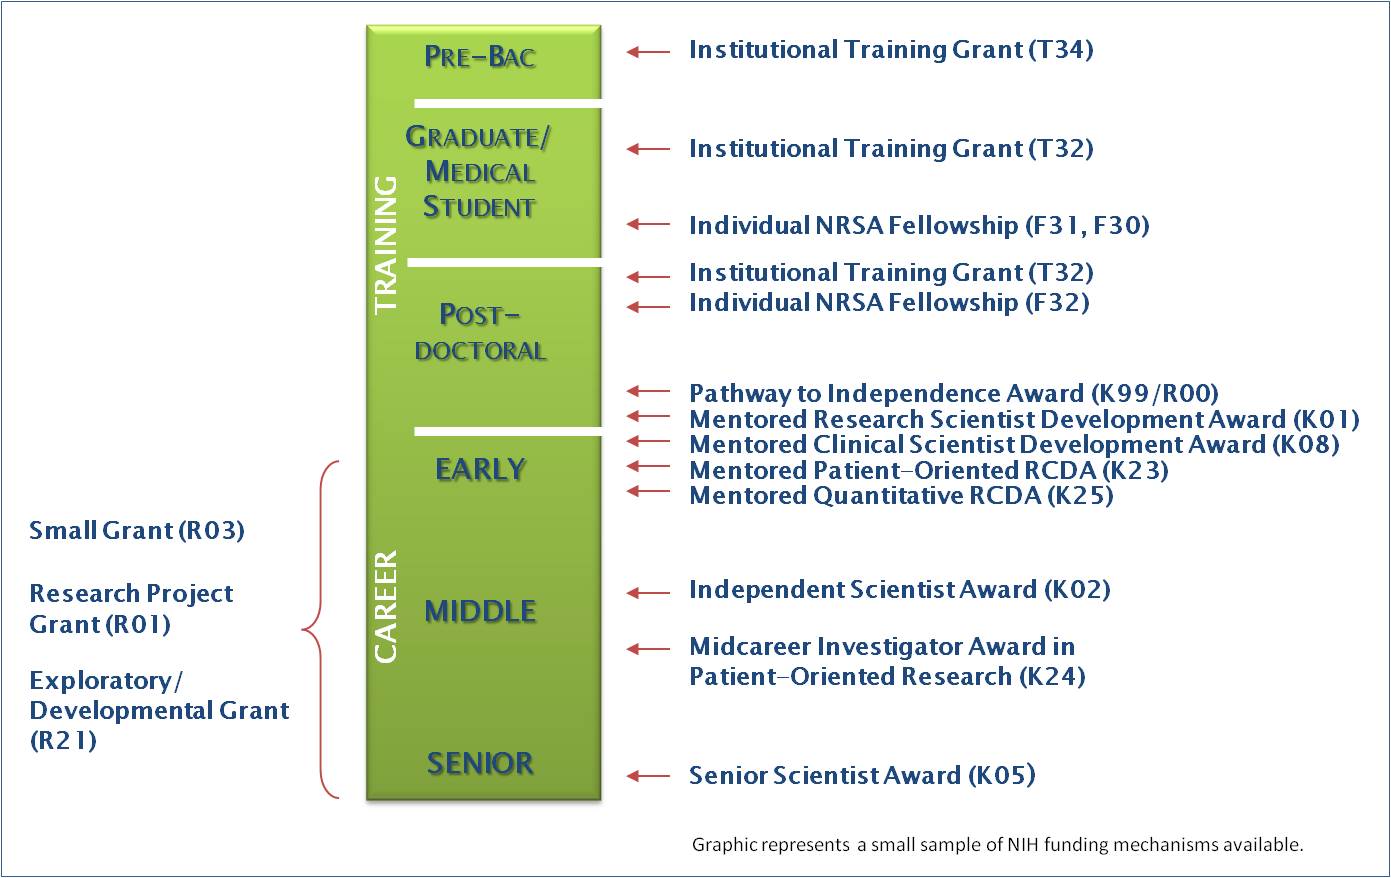 graphic shows a selection of NIH grant program and the approximate career stage in which people receive these awards